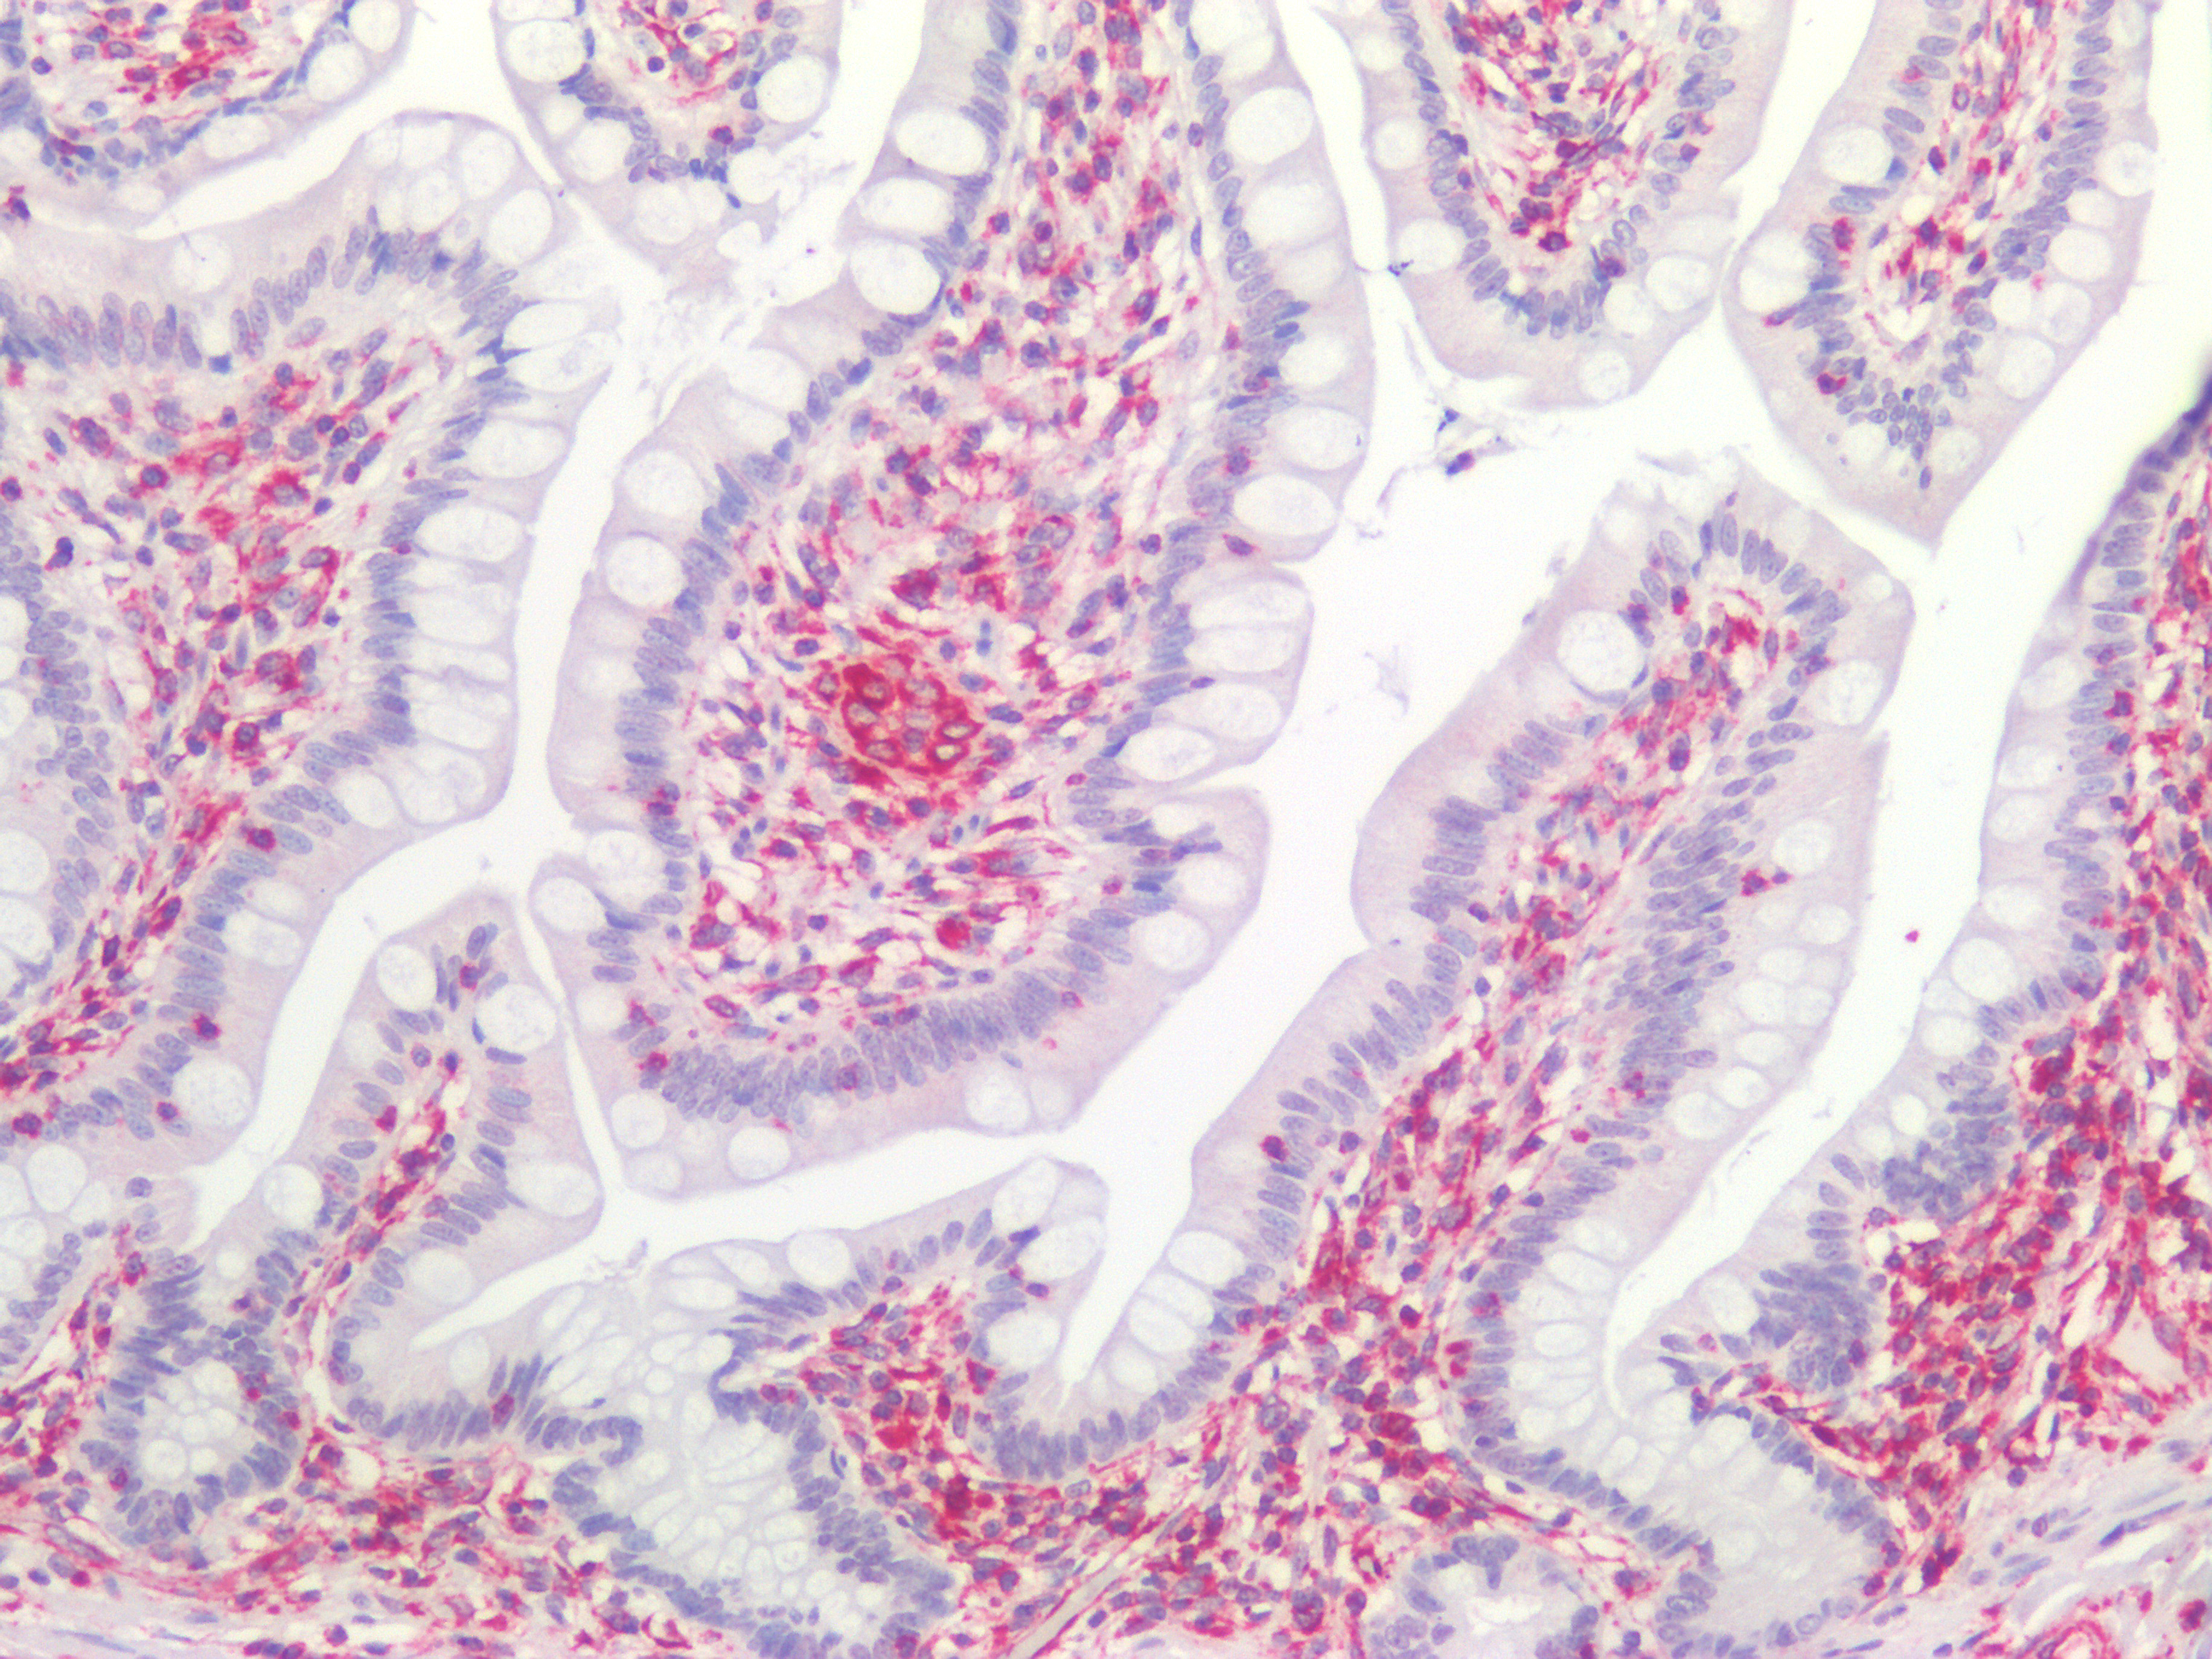 Figure 8. Immunostaining of human paraffin embedded tissue sections of human small intestine with MUB1903P (diluted 1:100), showing the specific pattern of vimentin in the mesenchymal cell types, such as fibroblasts in the connective tissue. As expected, no reactivity is seen in the epithelial cell compartment.